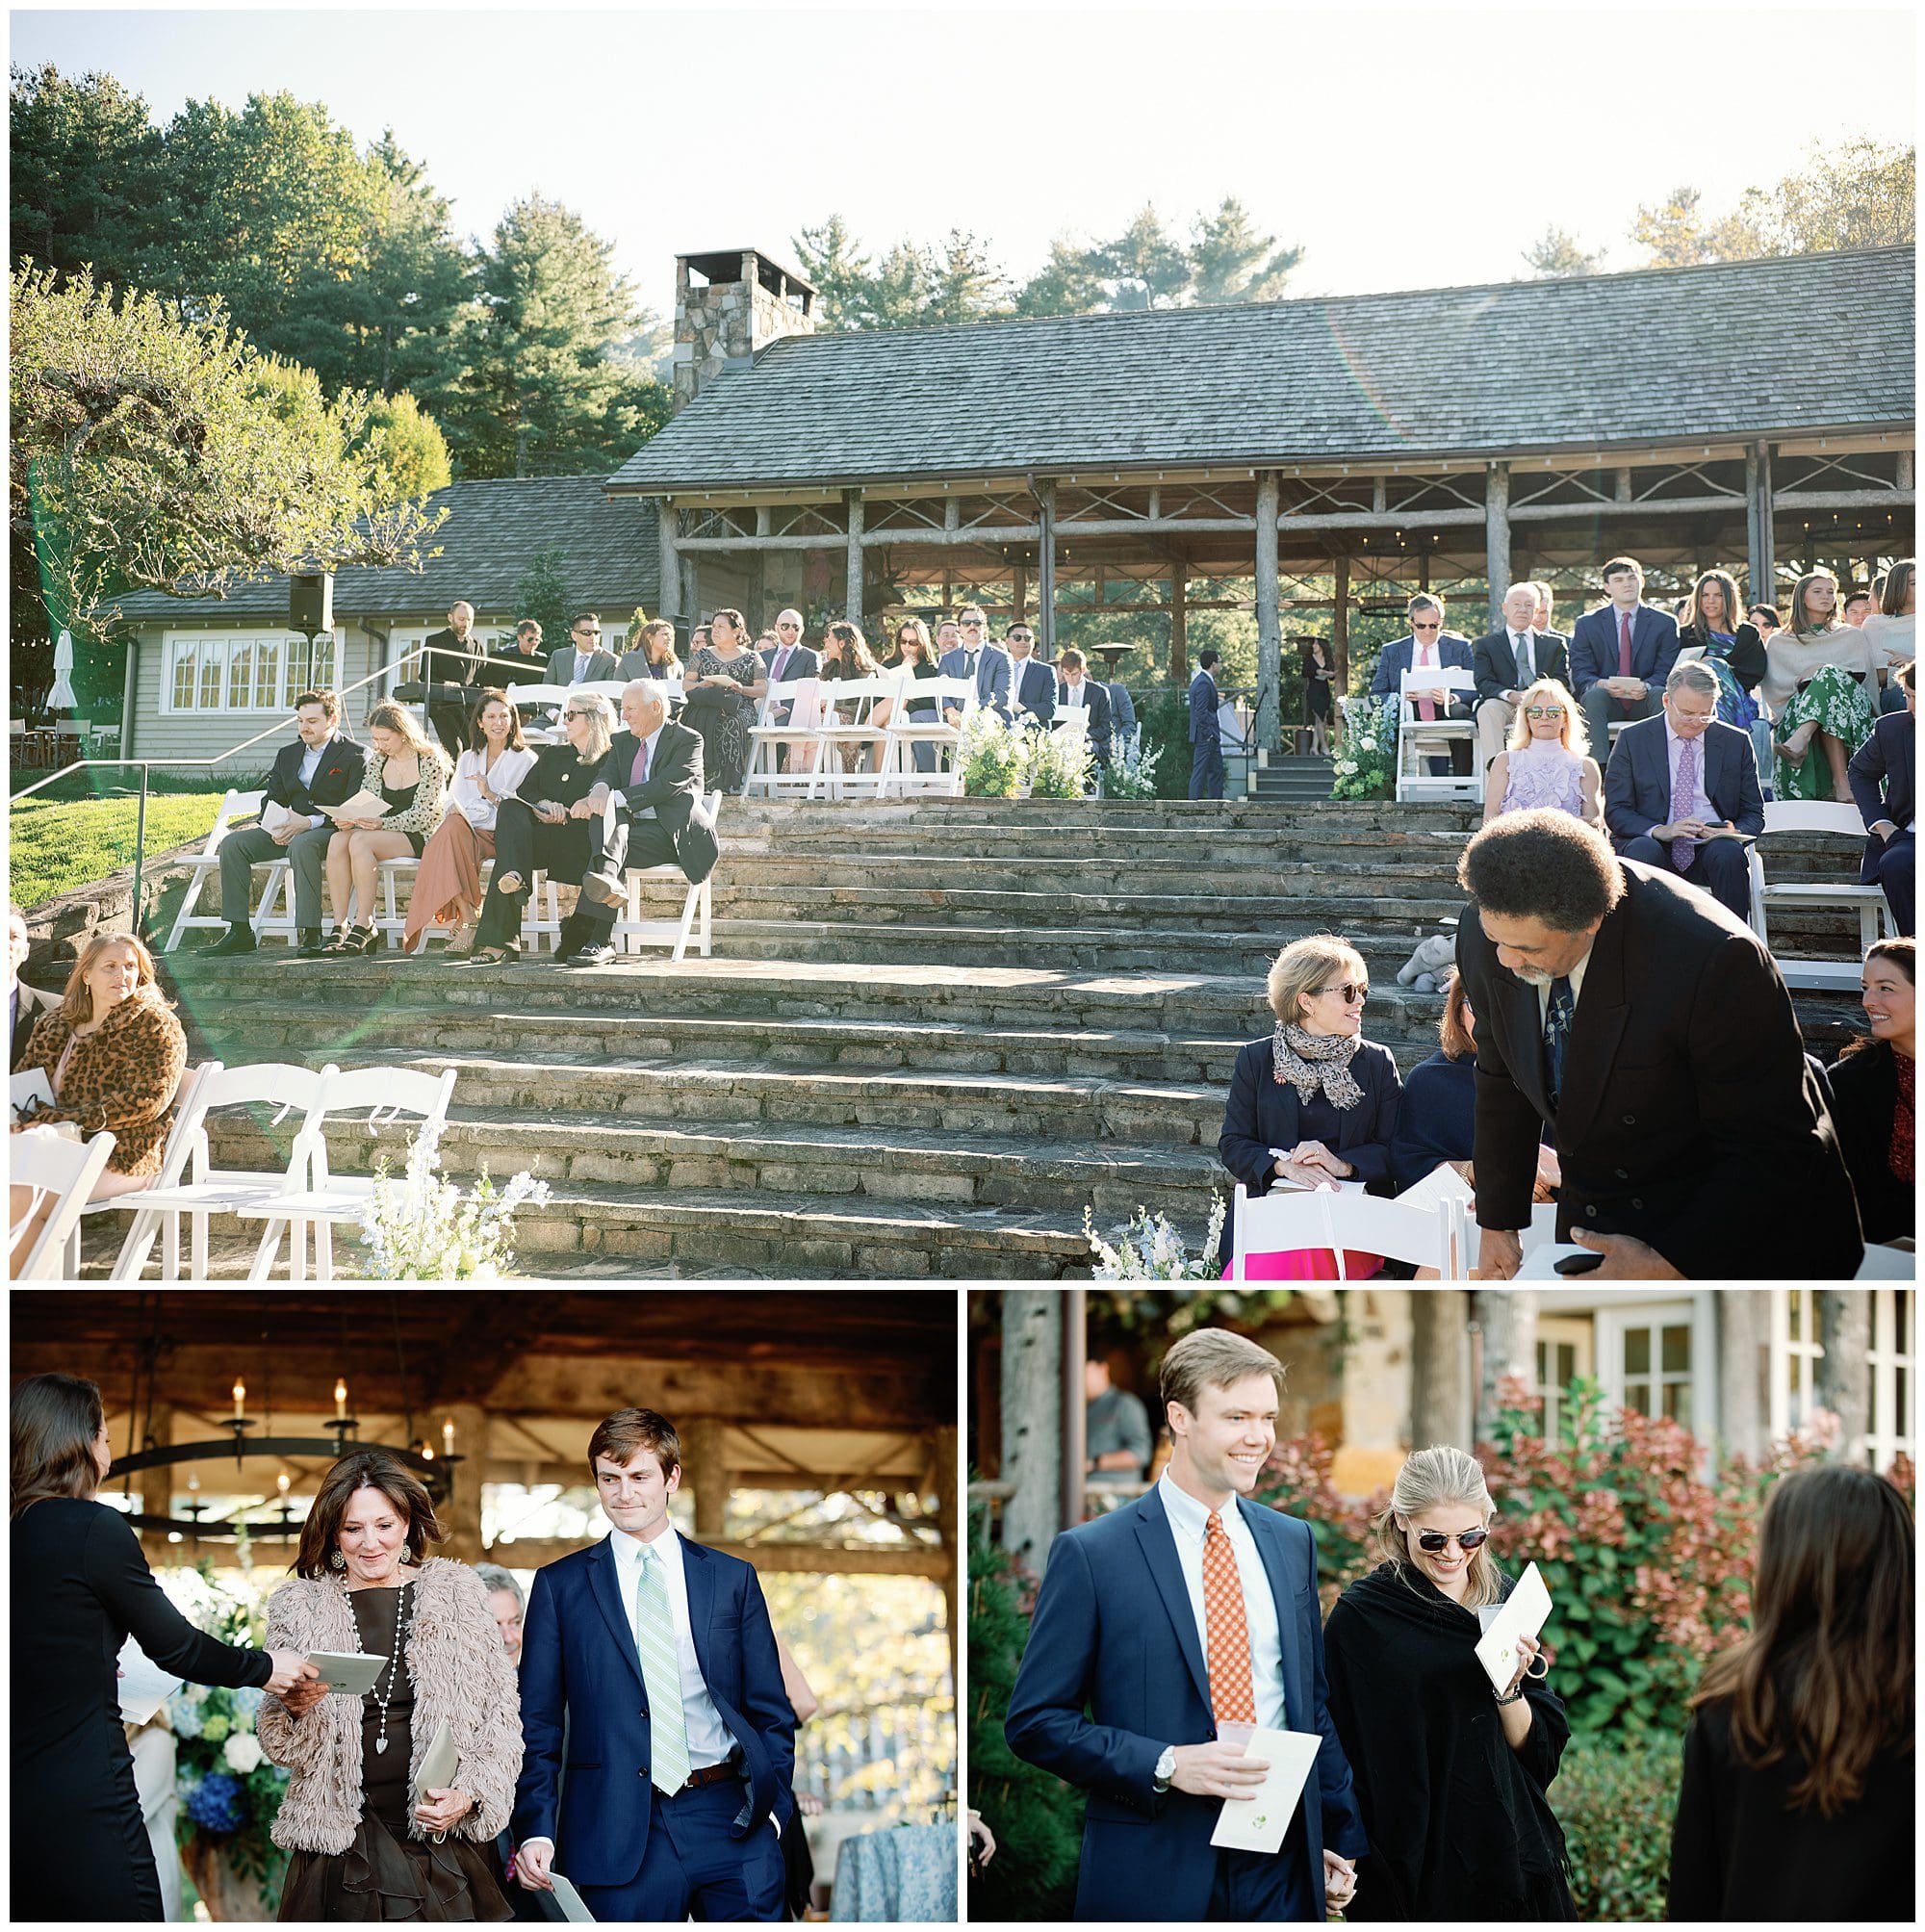 A wedding ceremony at an outdoor venue.